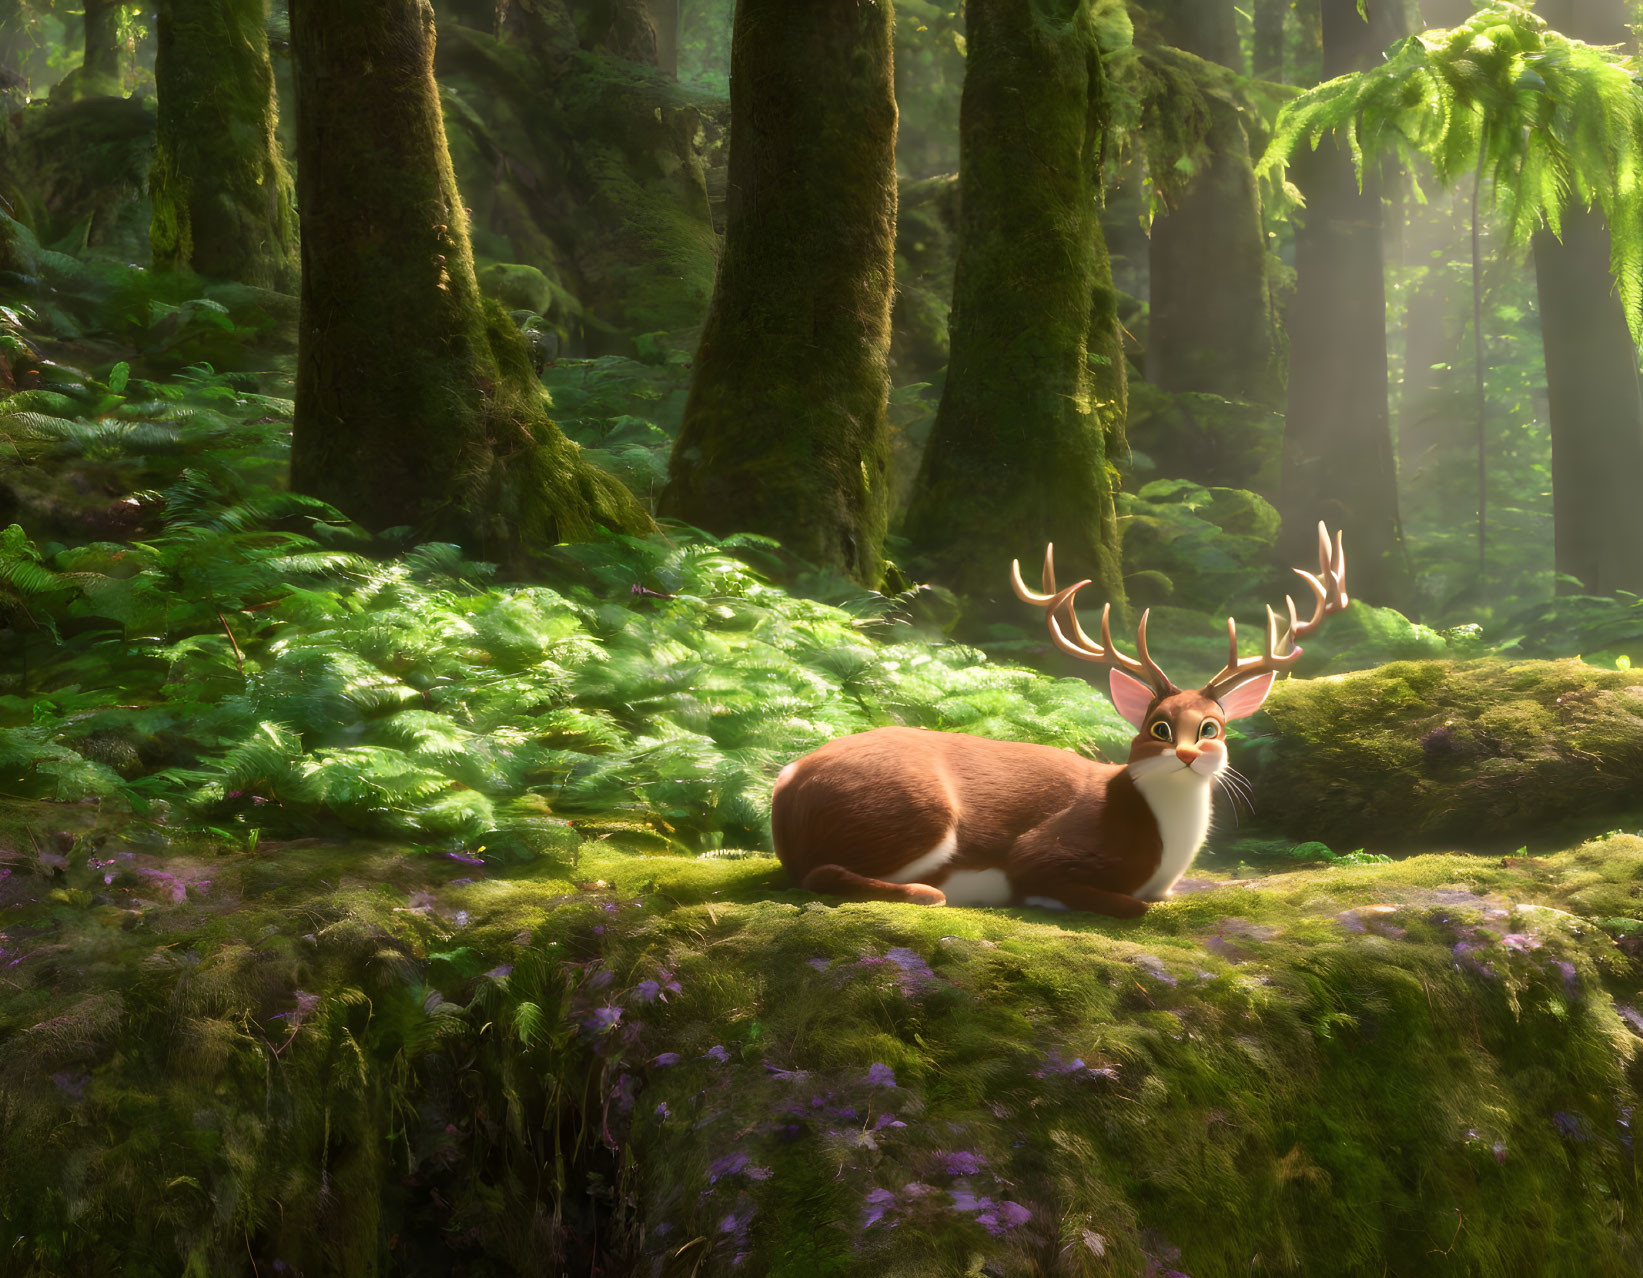 Majestic stag with large antlers in lush forest setting